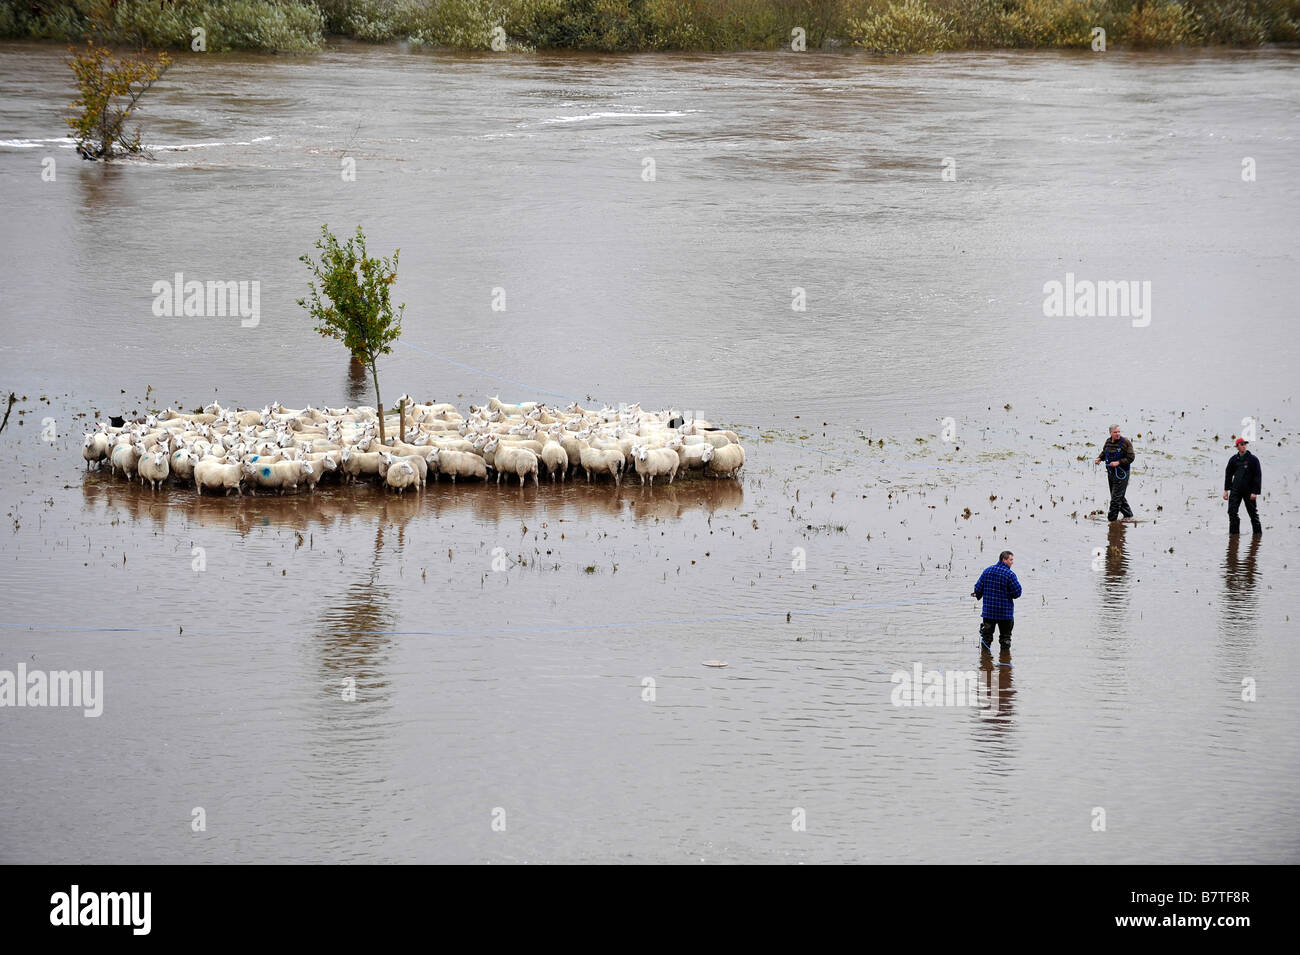 Farmers wade into floodwaters on the River Eden to rescue a flock of stranded sheep Stock Photo